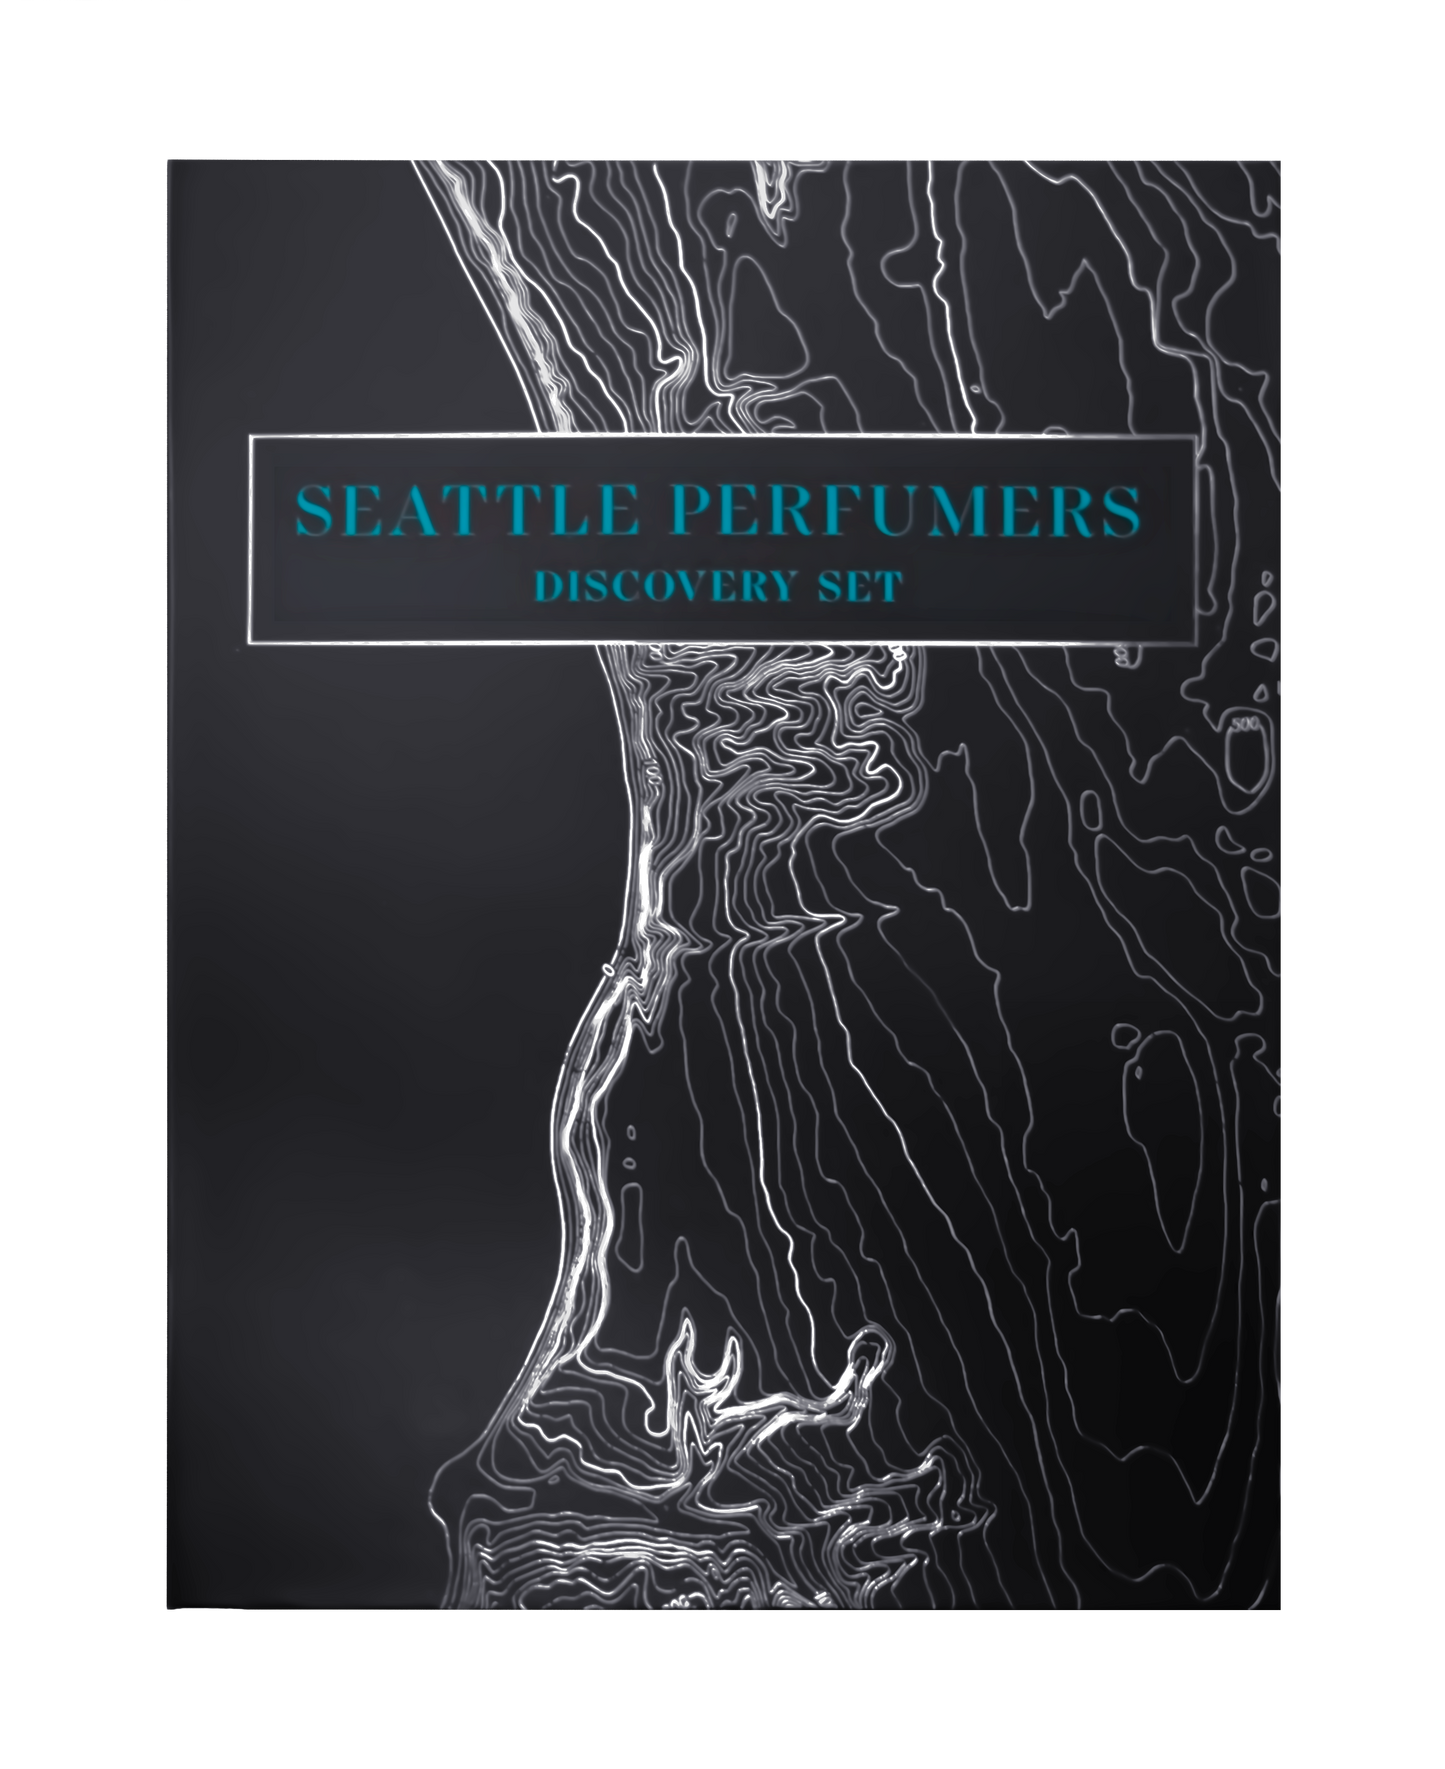 Seattle Perfumers Discovery Set, First Edition